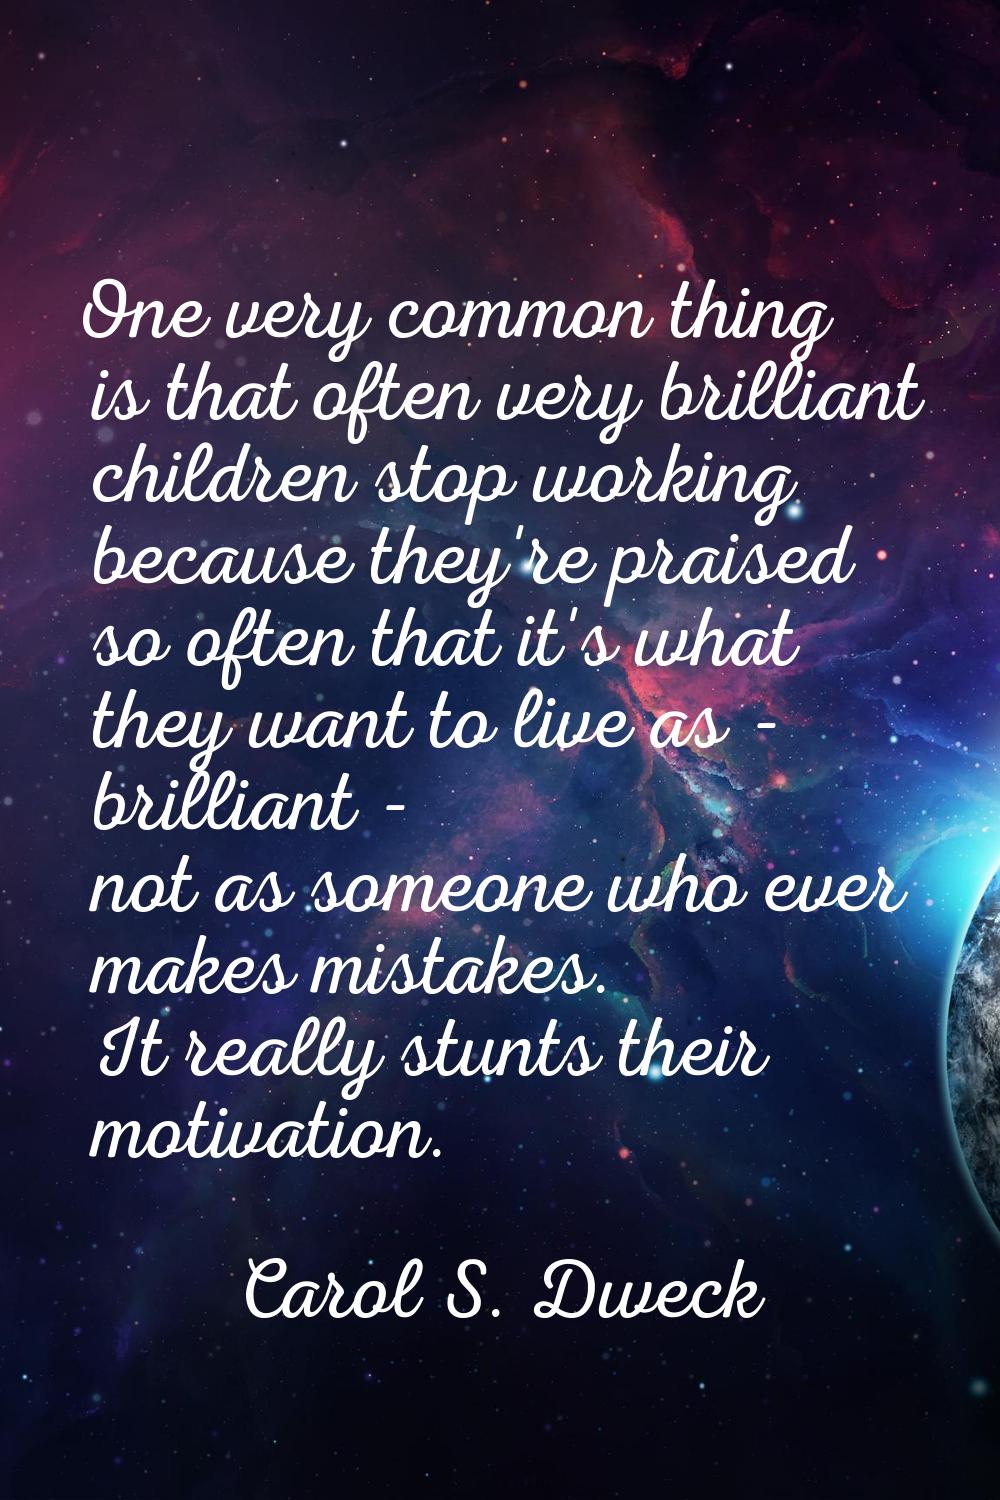 One very common thing is that often very brilliant children stop working because they're praised so